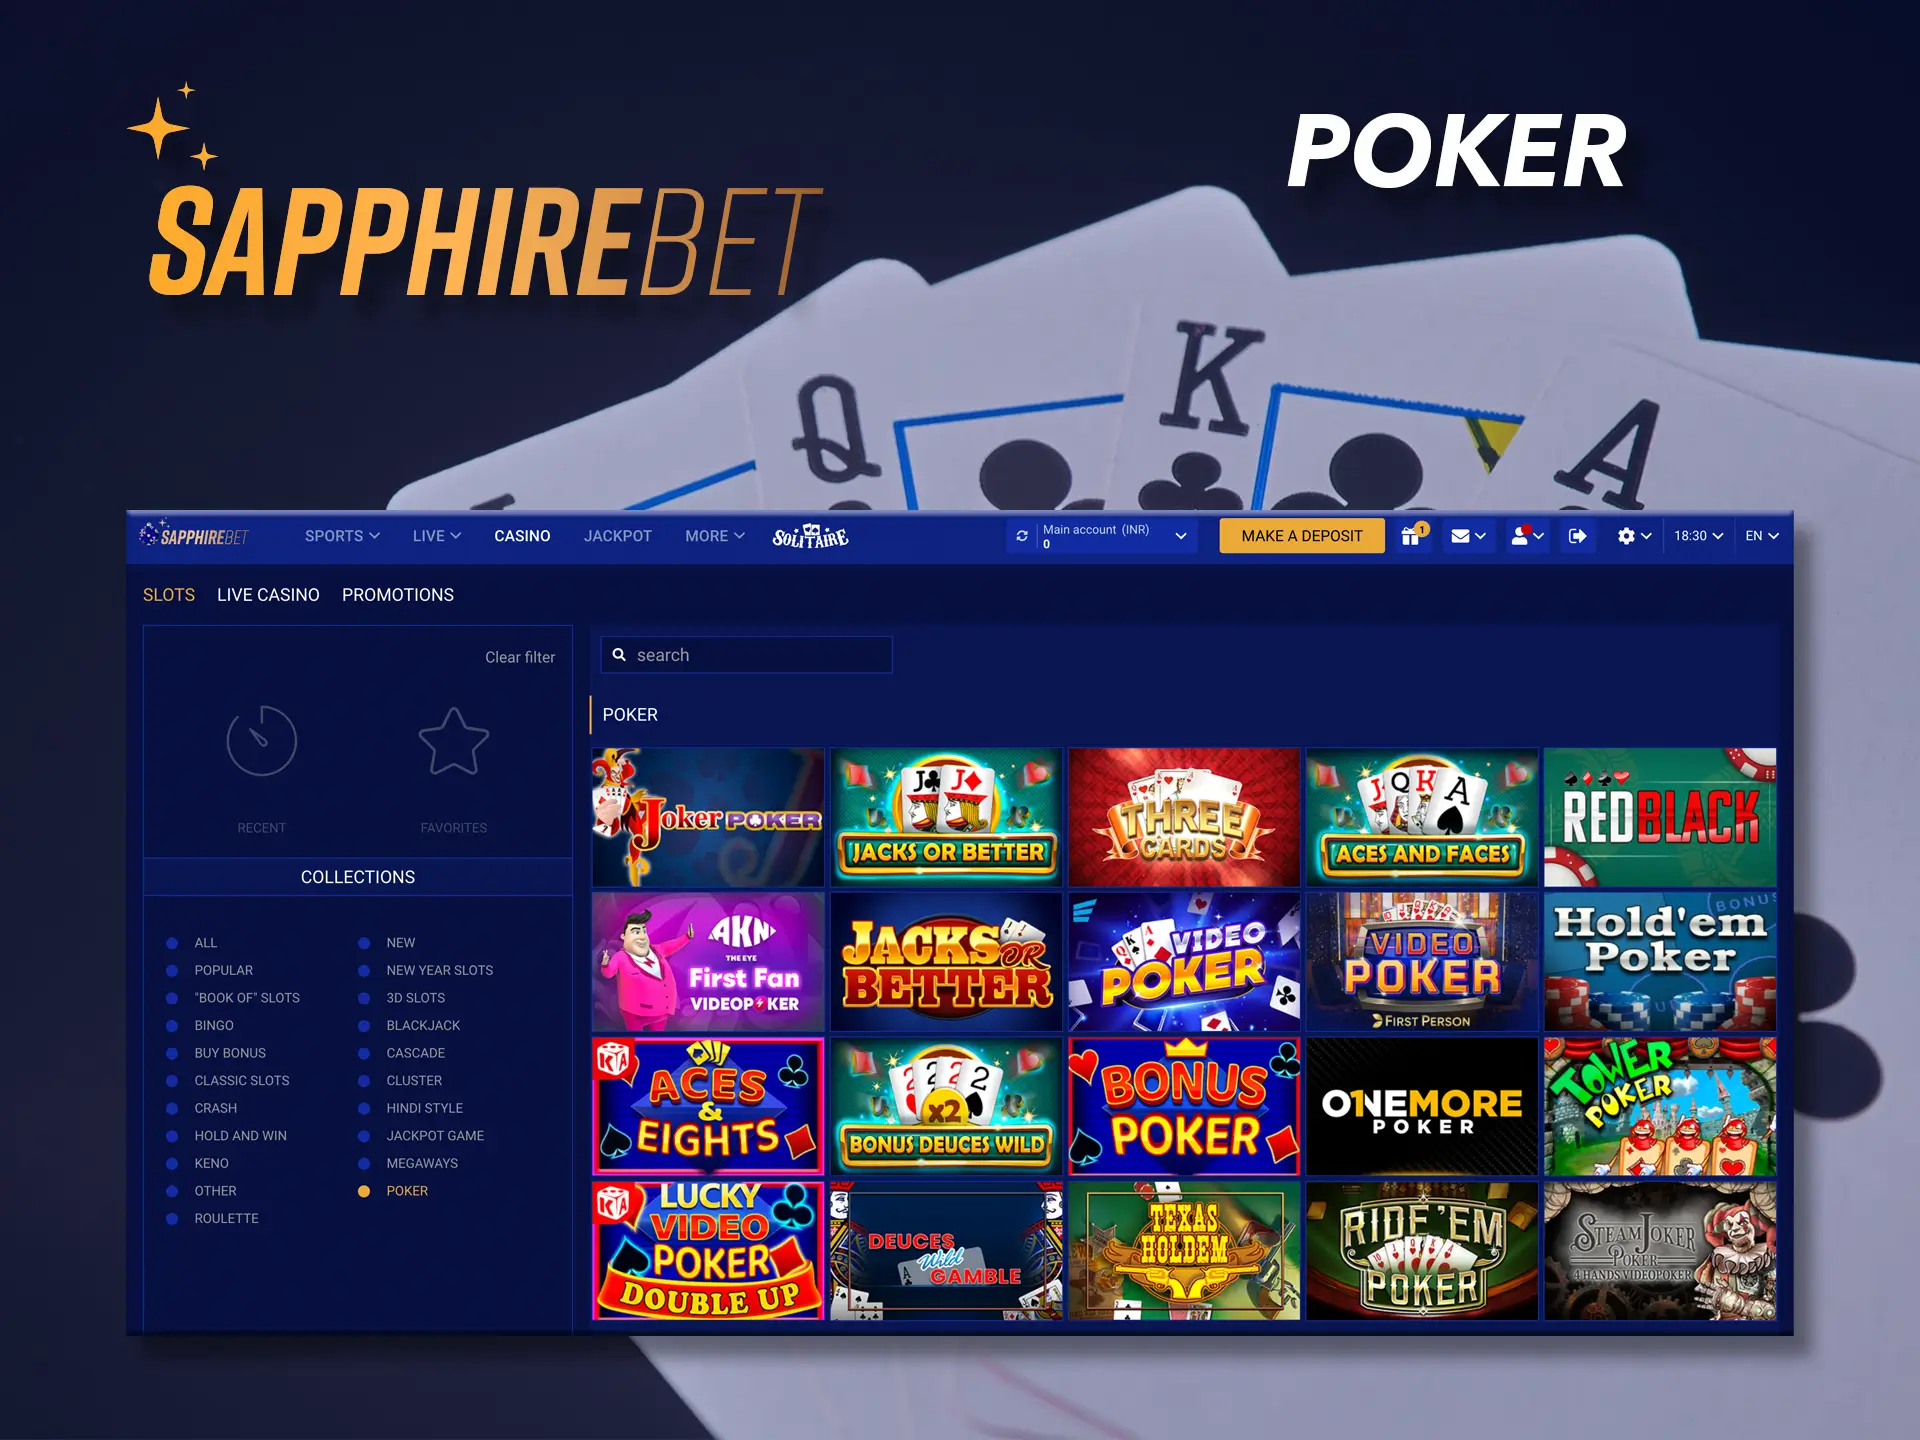 Use your skills in attacking tactics in poker from Sapphirebet.